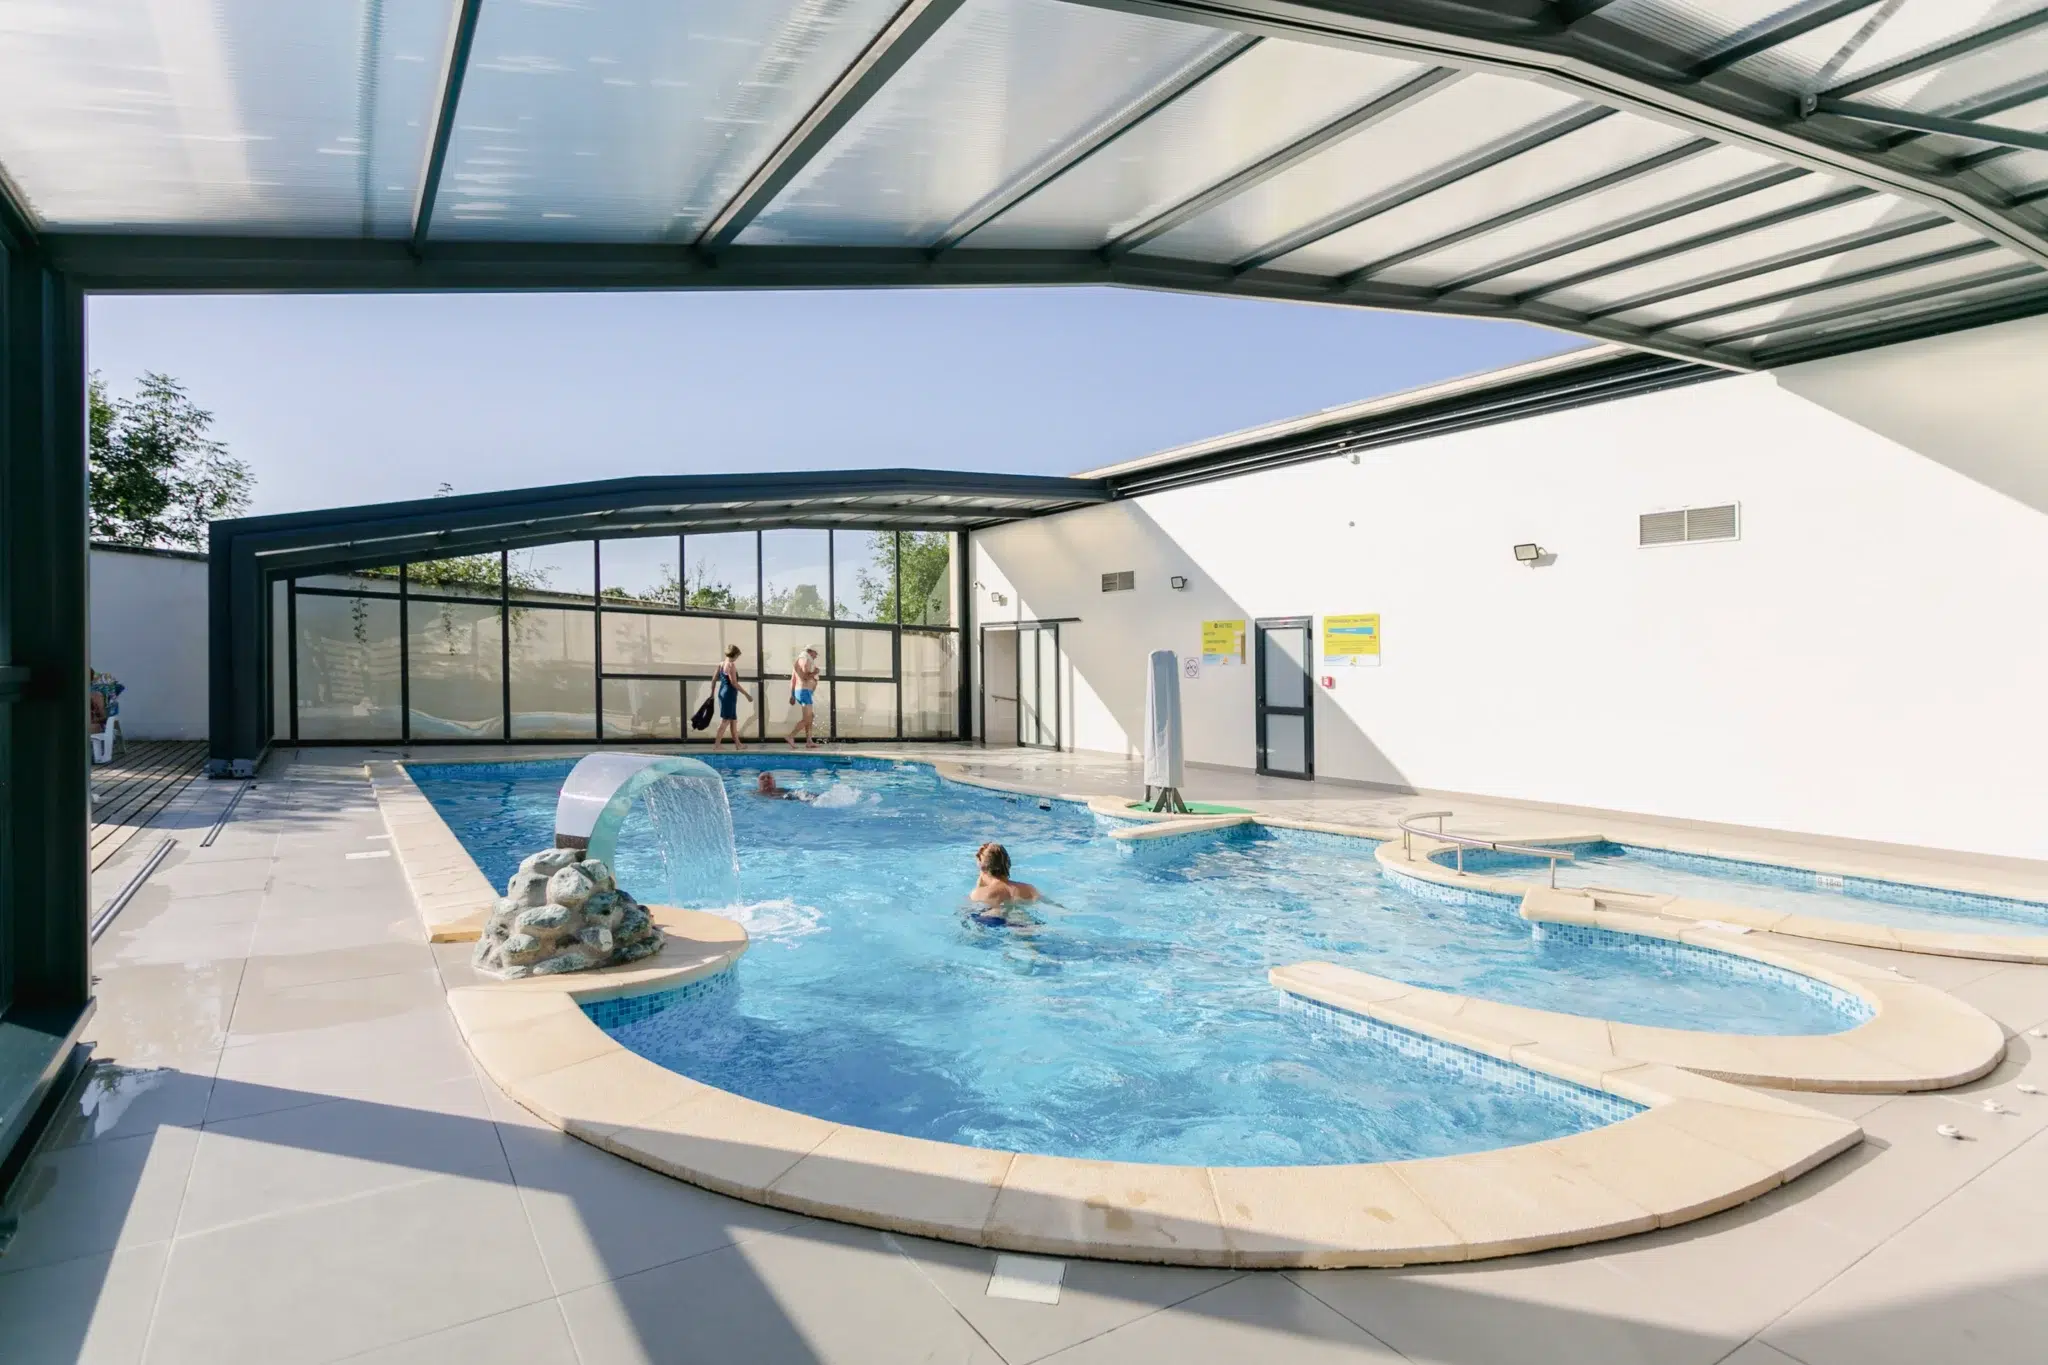 camping piscine coucrte chauffét moselle